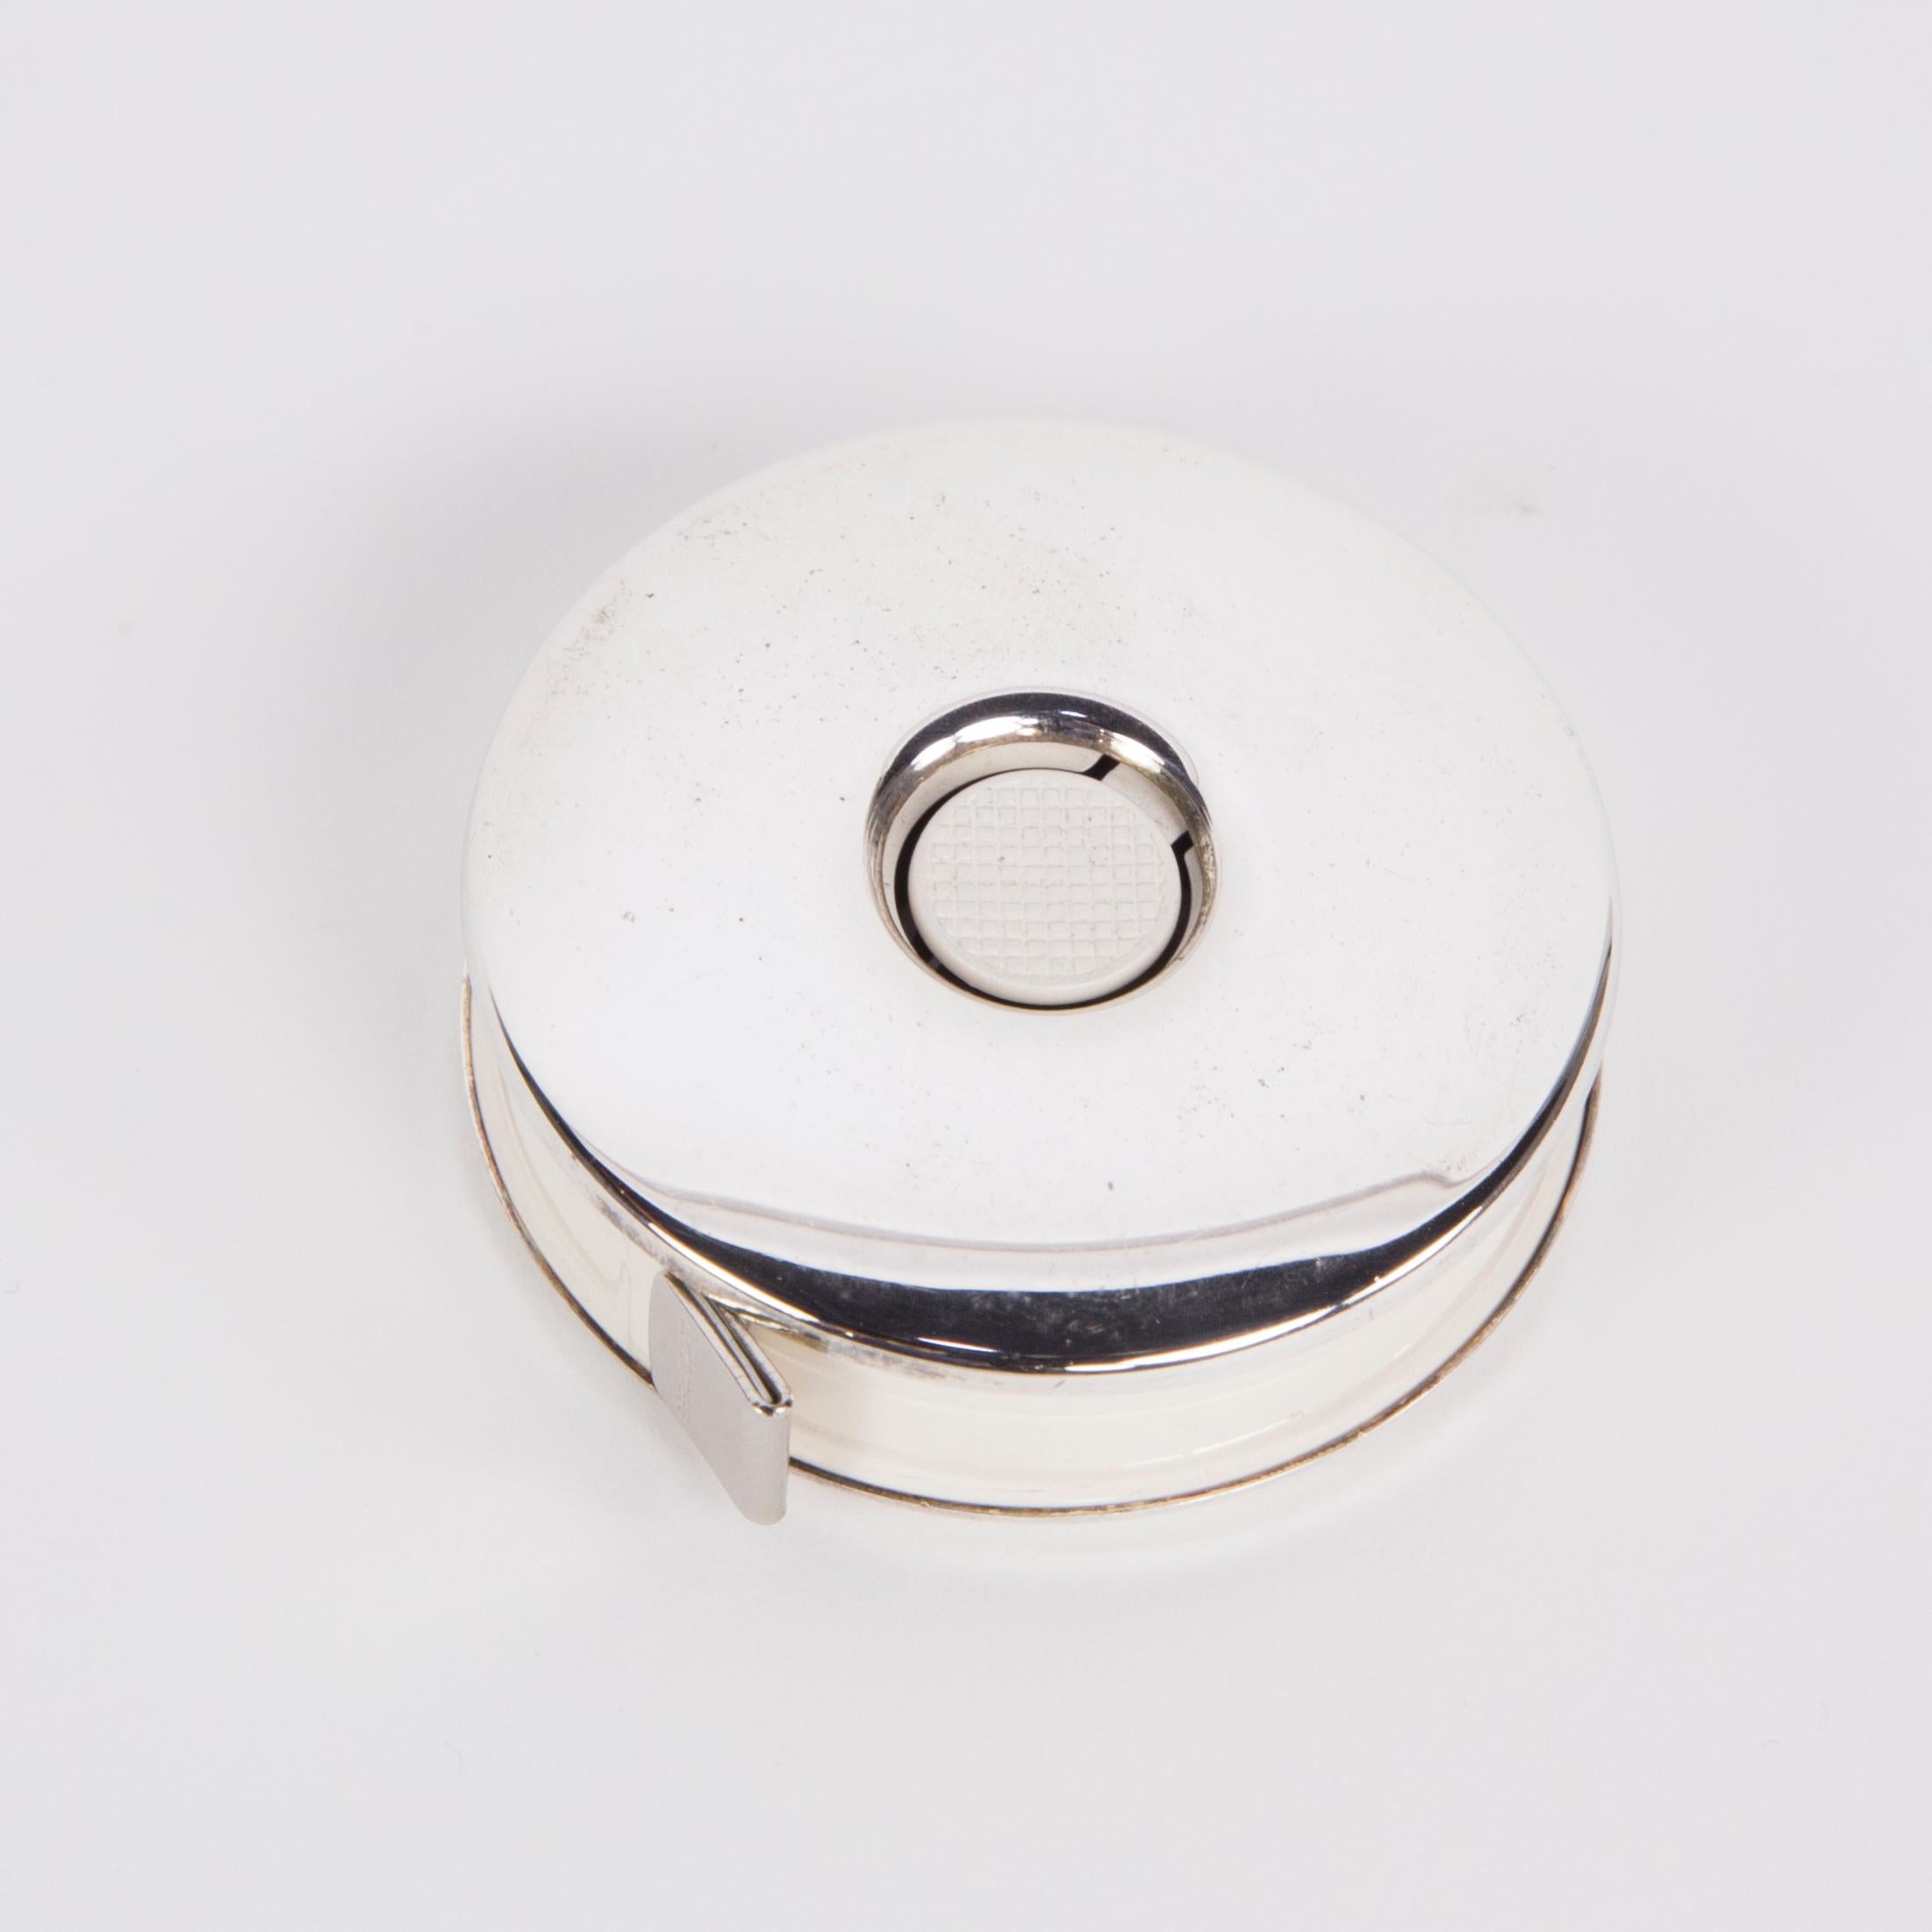 Classic Sterling Silver Circular Push Button Tape Measure; approx. 2” diameter  On your desk or on the go! 
